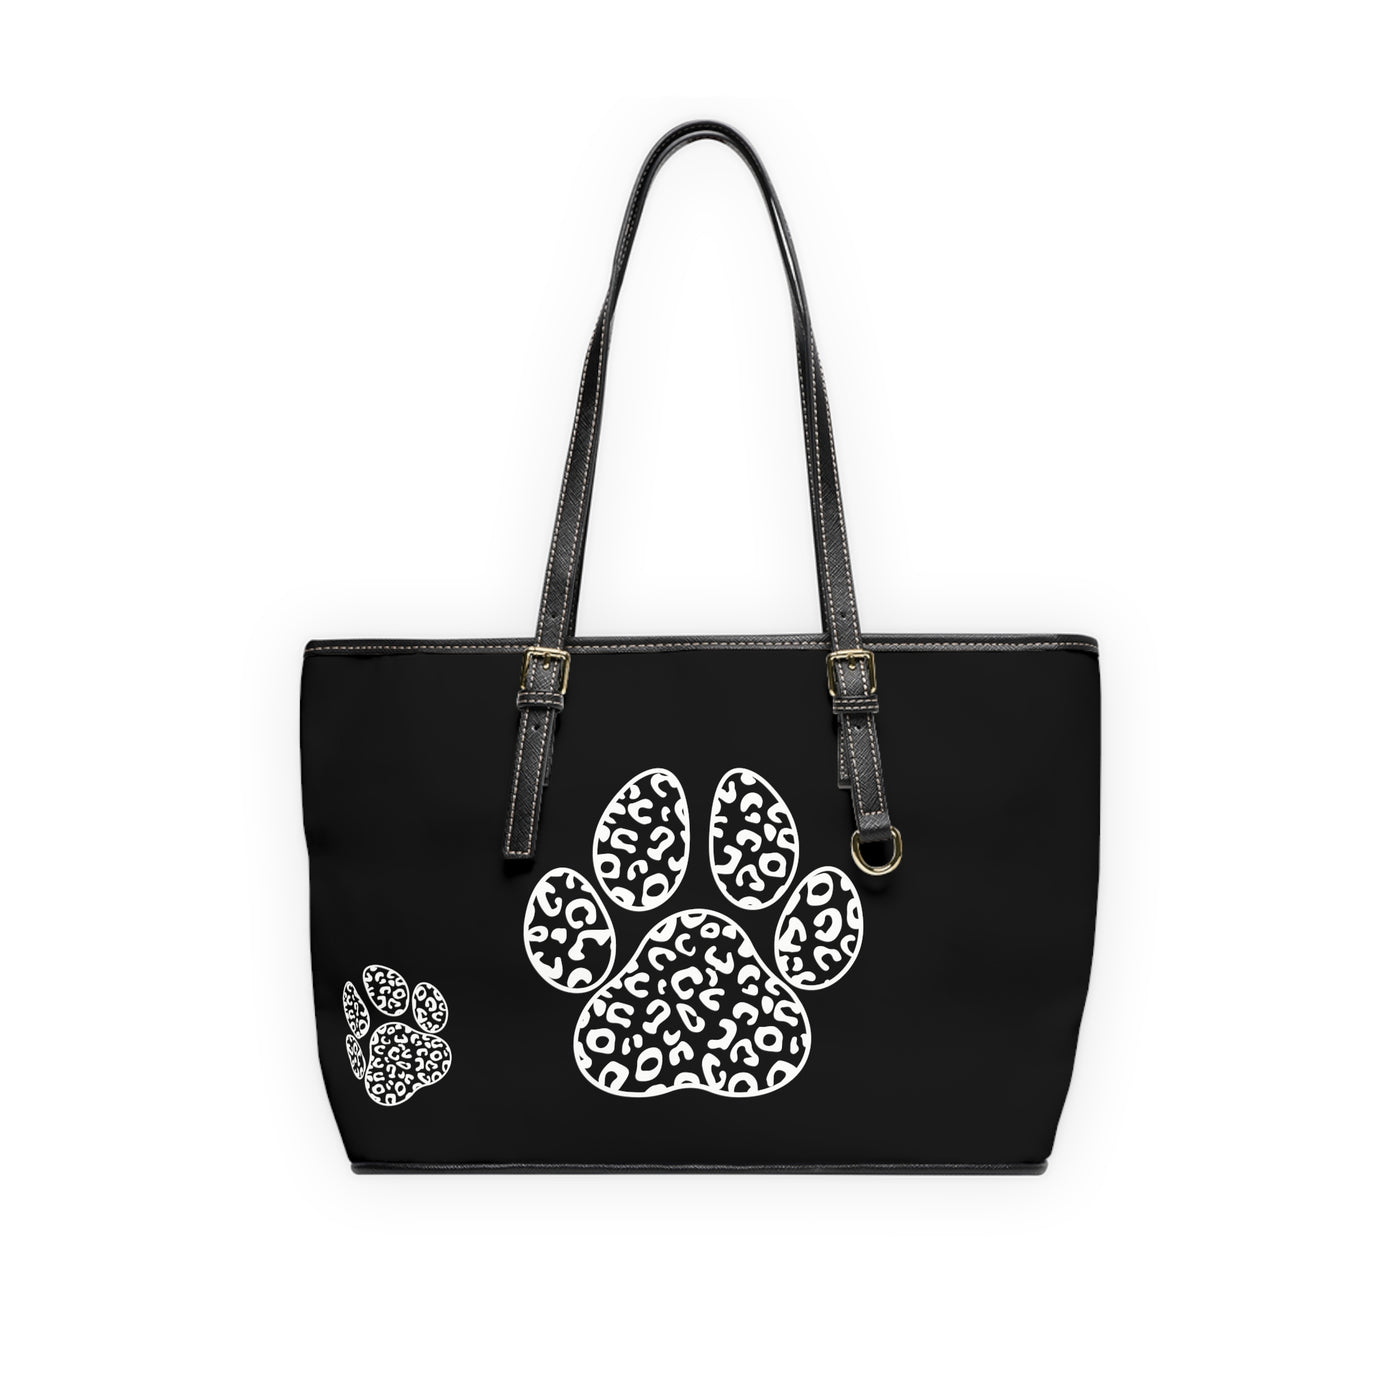 PAWSITIVELY CHIC PU Leather Shoulder Bag